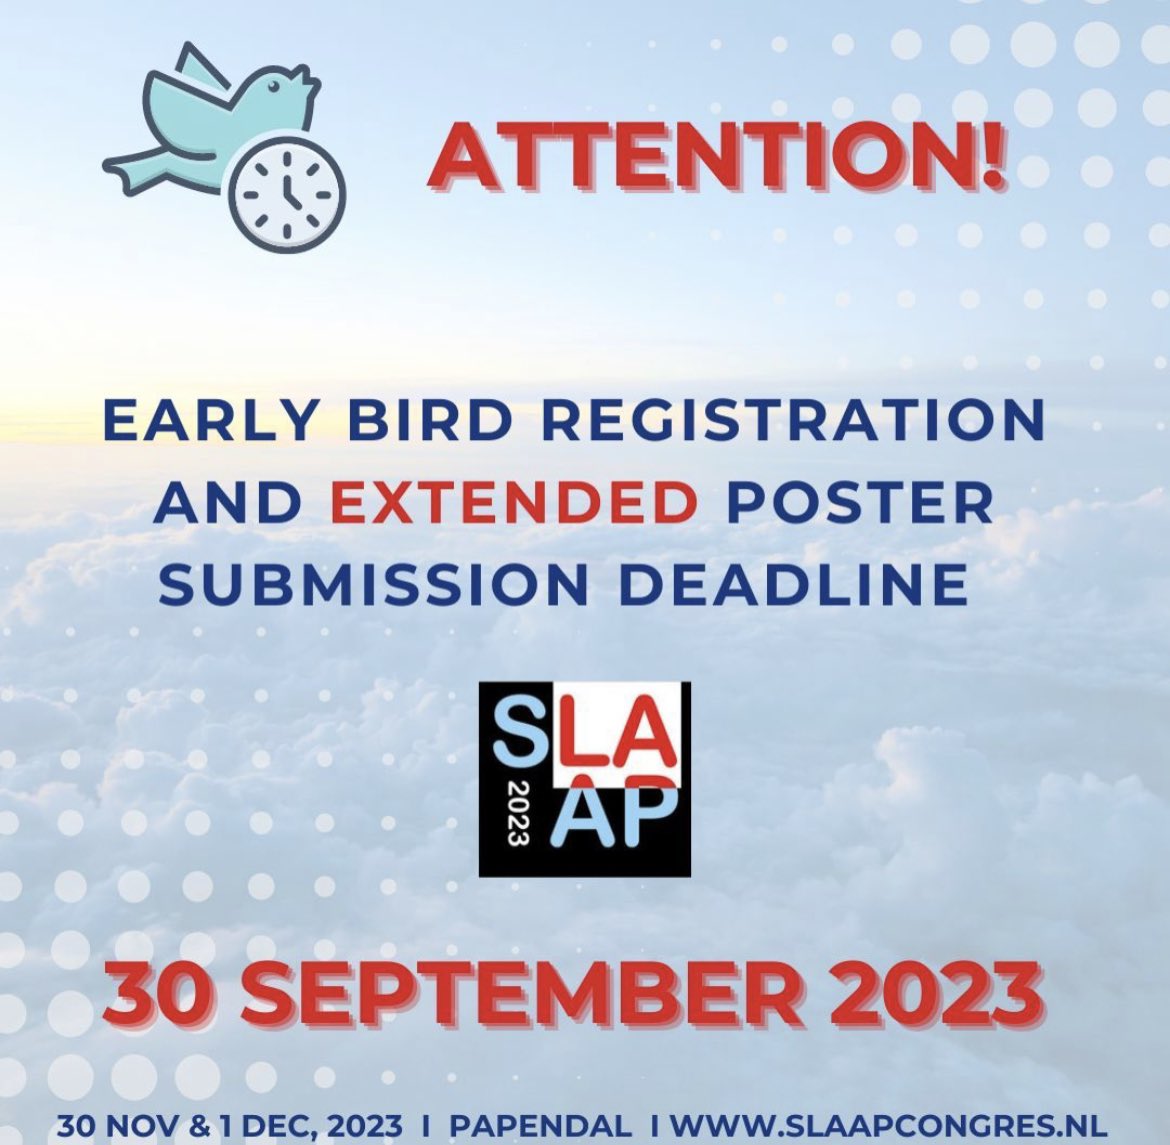 📣 Calling all Early Birds!! 30 September is the deadline to register for discounted fees for SLAAP2023! We're also extending the poster submission deadline to the same date. Act fast to secure your spot! Register now --> eventure-online.com/eventure/login… or visit slaapcongres.nl